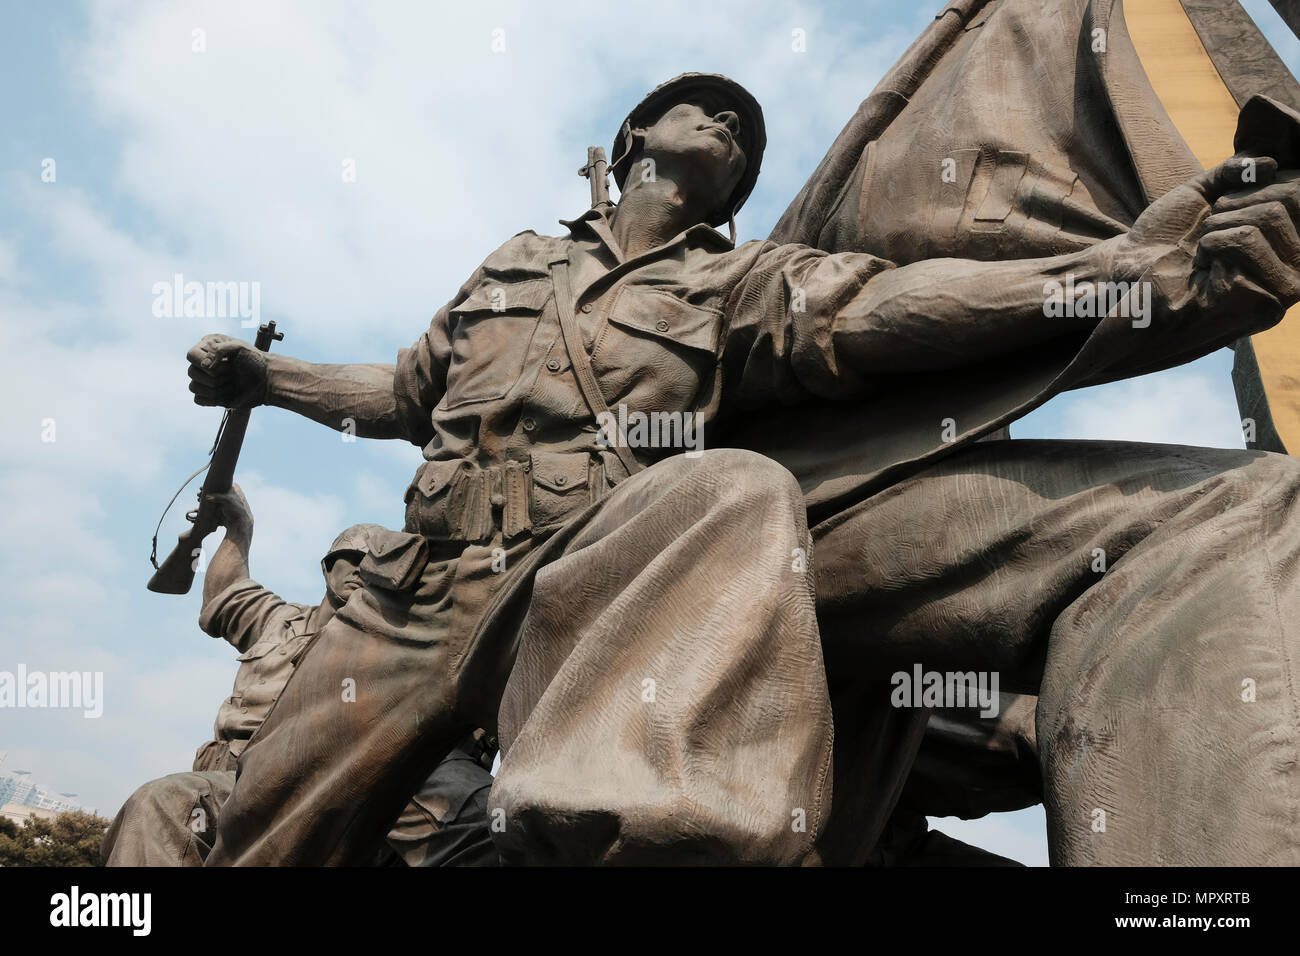 Monument depicting scene of the Korean war displayed at the entrance to the War Memorial of Korea museum located in Yongsan-gu district on the former site of the army headquarters to exhibit and memorialize the military history of Korea in the city of Seoul capital of South Korea Stock Photo